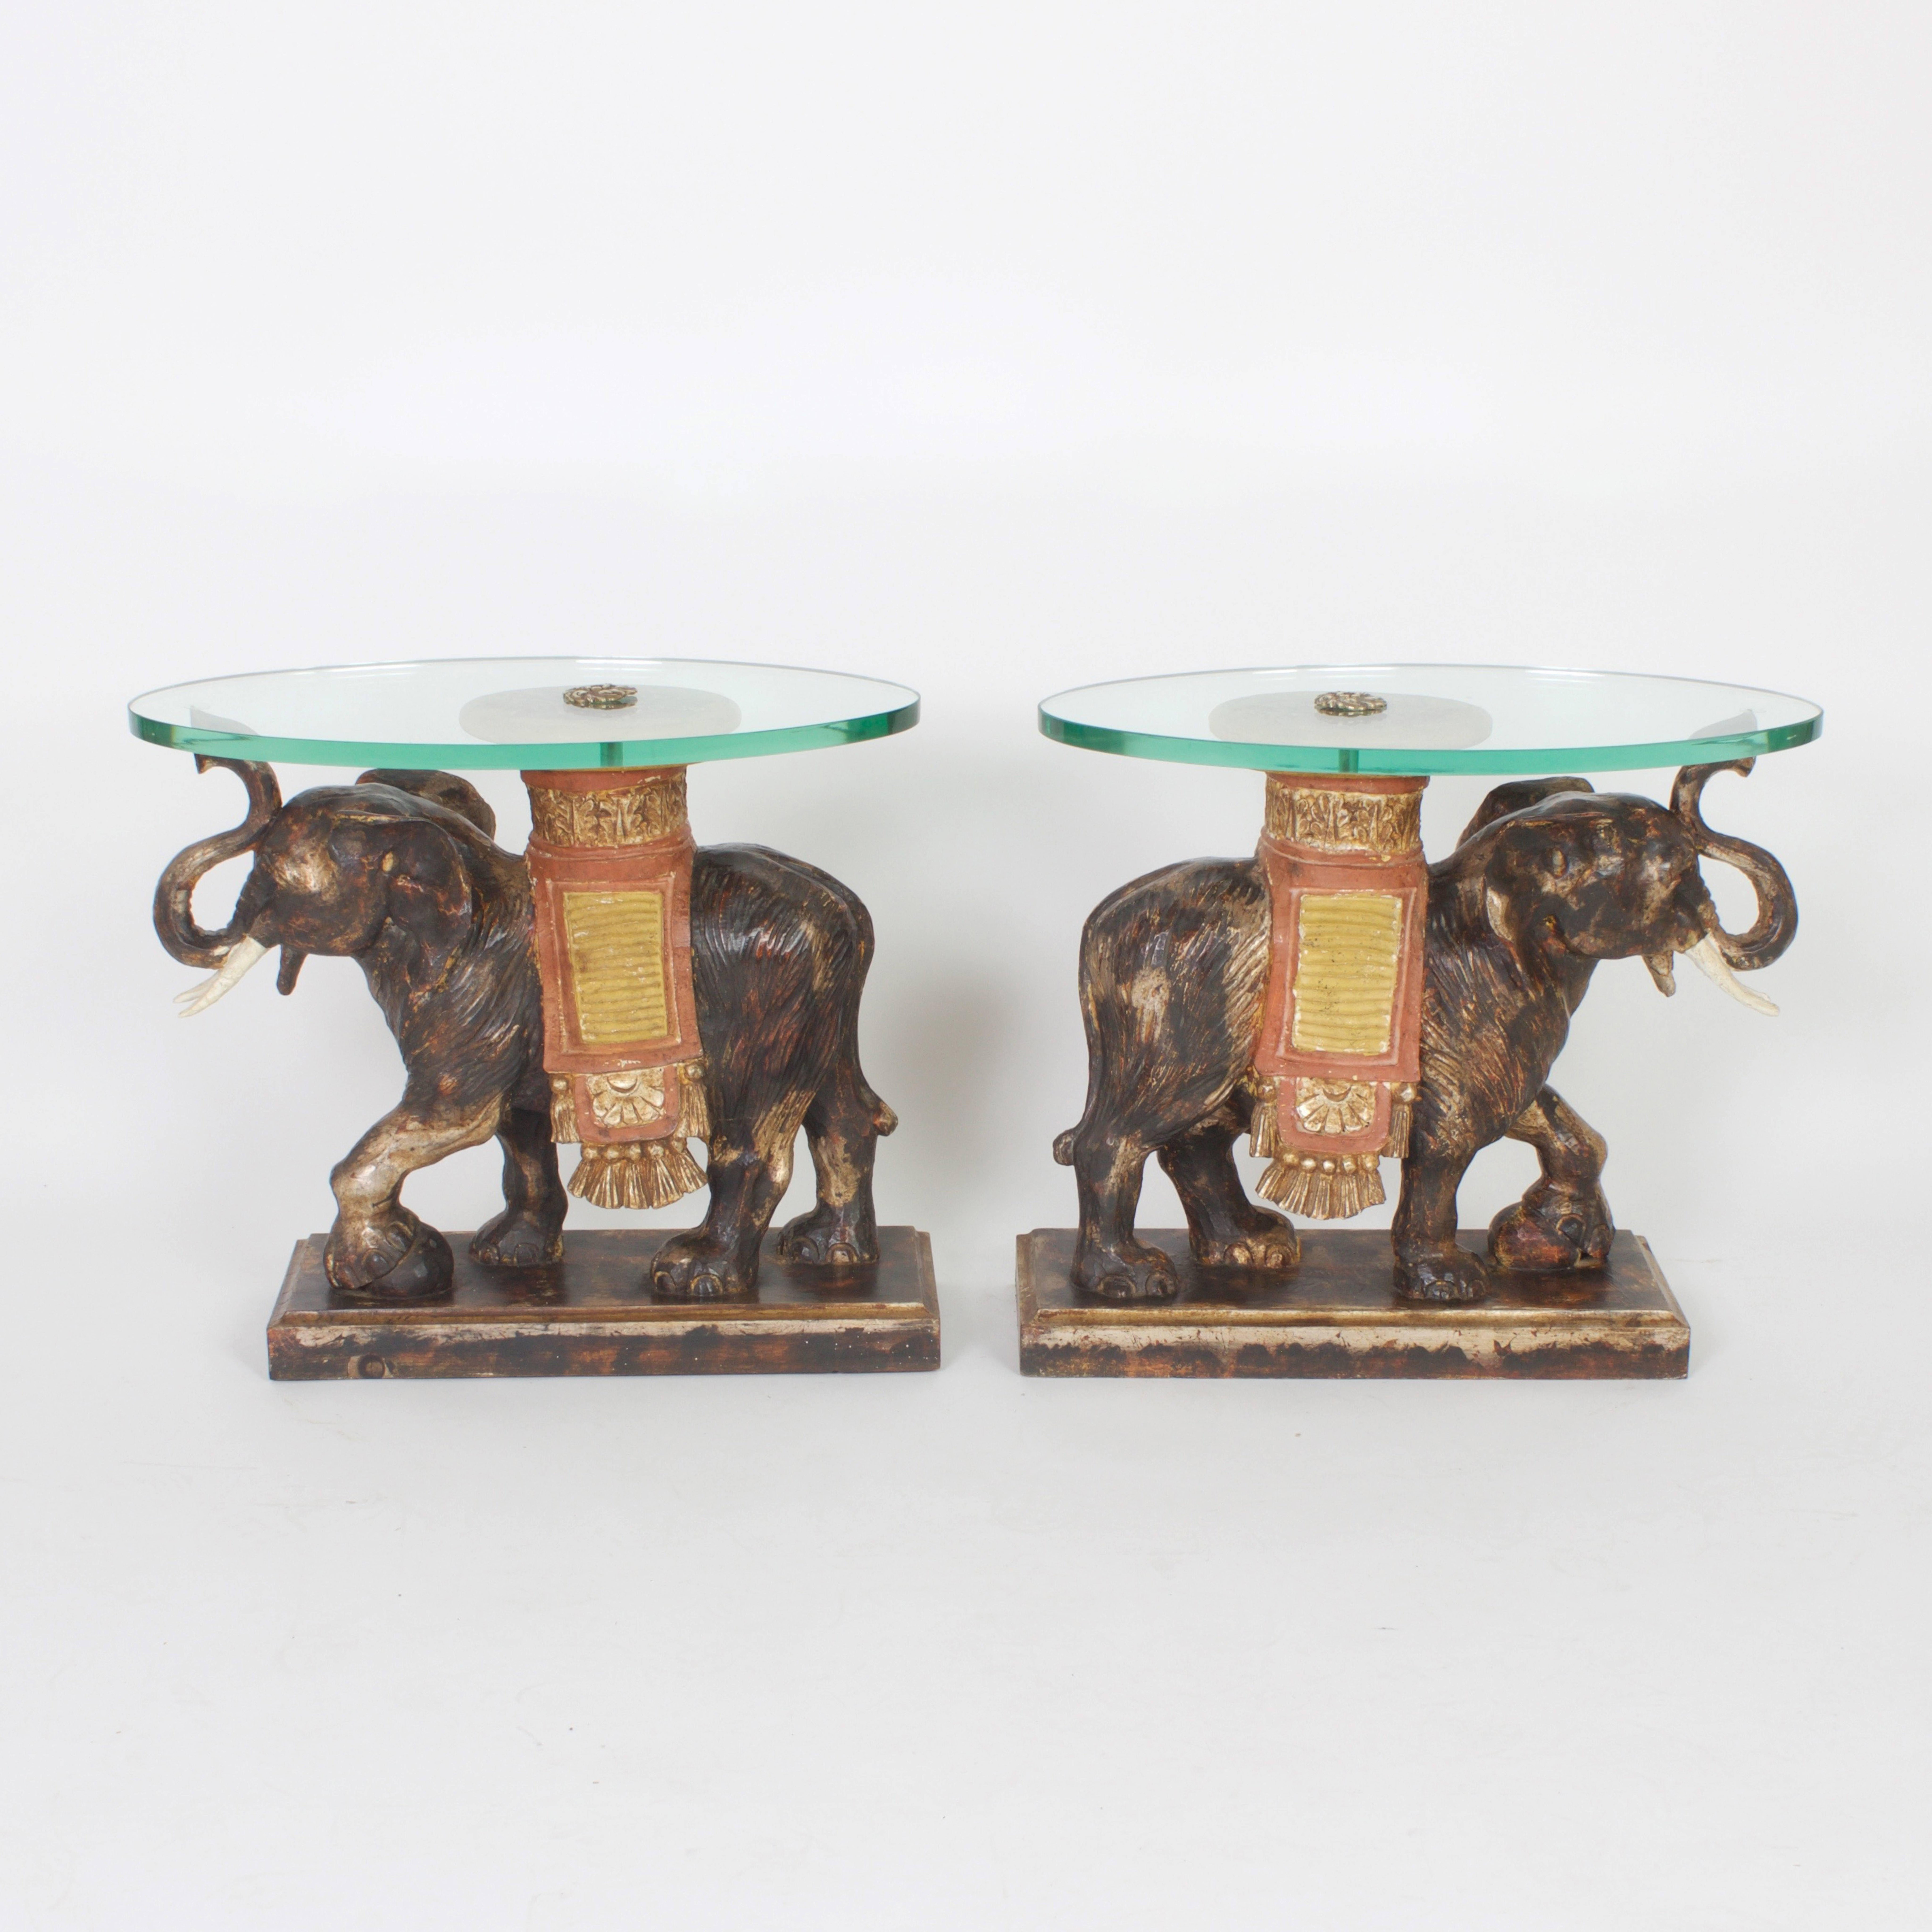 Modern rustic Italian Mid-Century elephant end tables with an Anglo Indian vibe. The elephants are carved wood and painted with an old world technique. The thick glass tops give these tables a sense of luxury. 

.